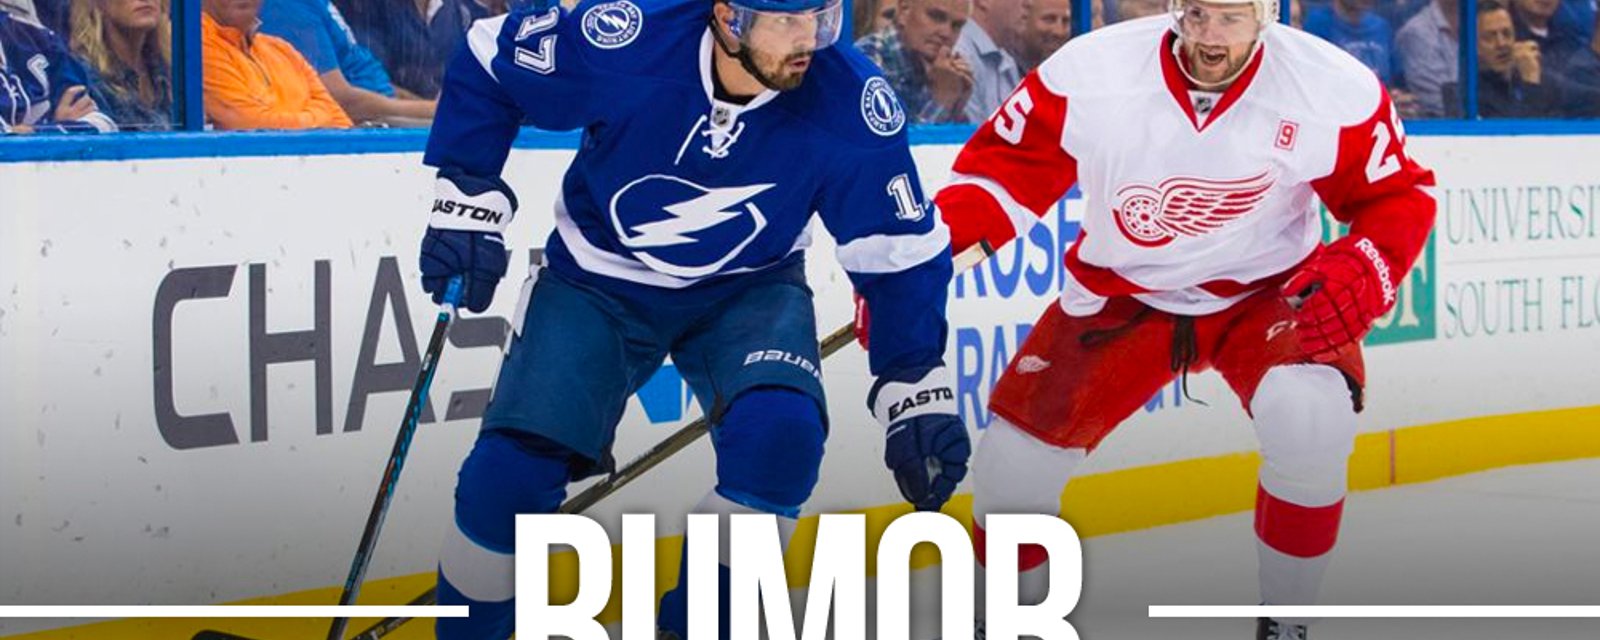 Trade rumours between Red Wings and Lightning pick up steam